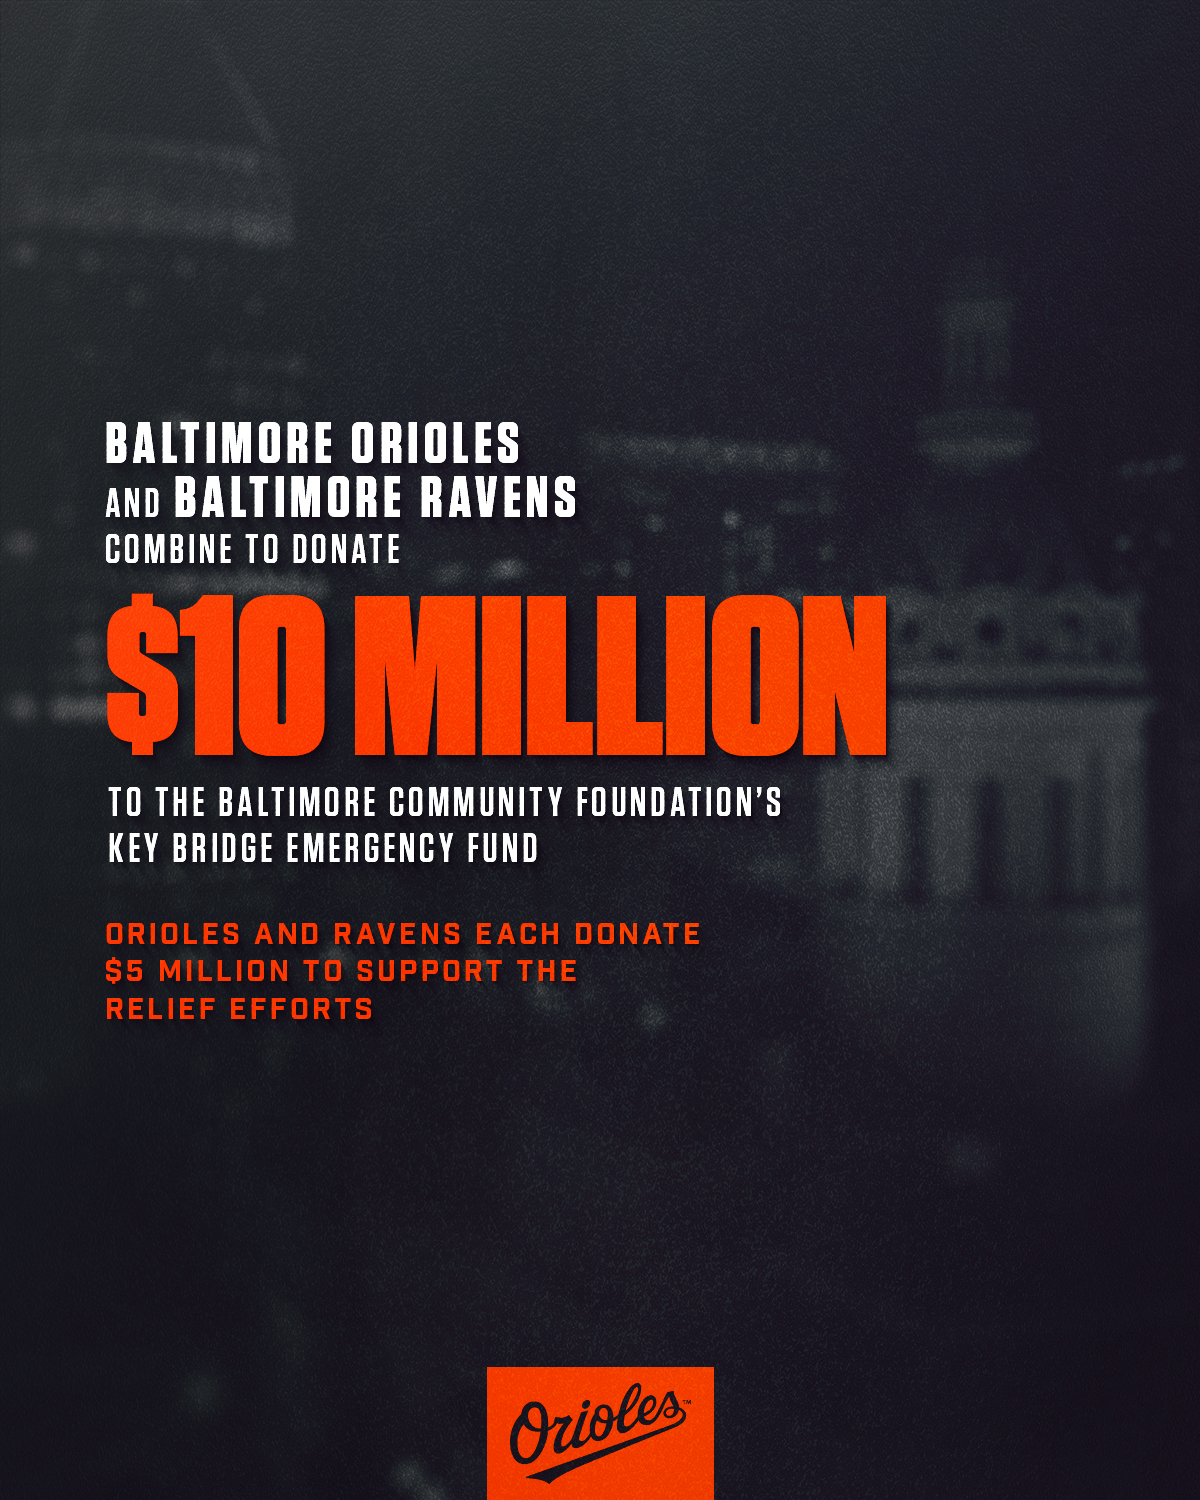 Baltimore Orioles and Baltimore Ravens Combine To Donate $10 Million To The Baltimore Community Foundation’s Key Bridge Emergency Fund Ravens and Orioles each donate $5 million to support the relief efforts